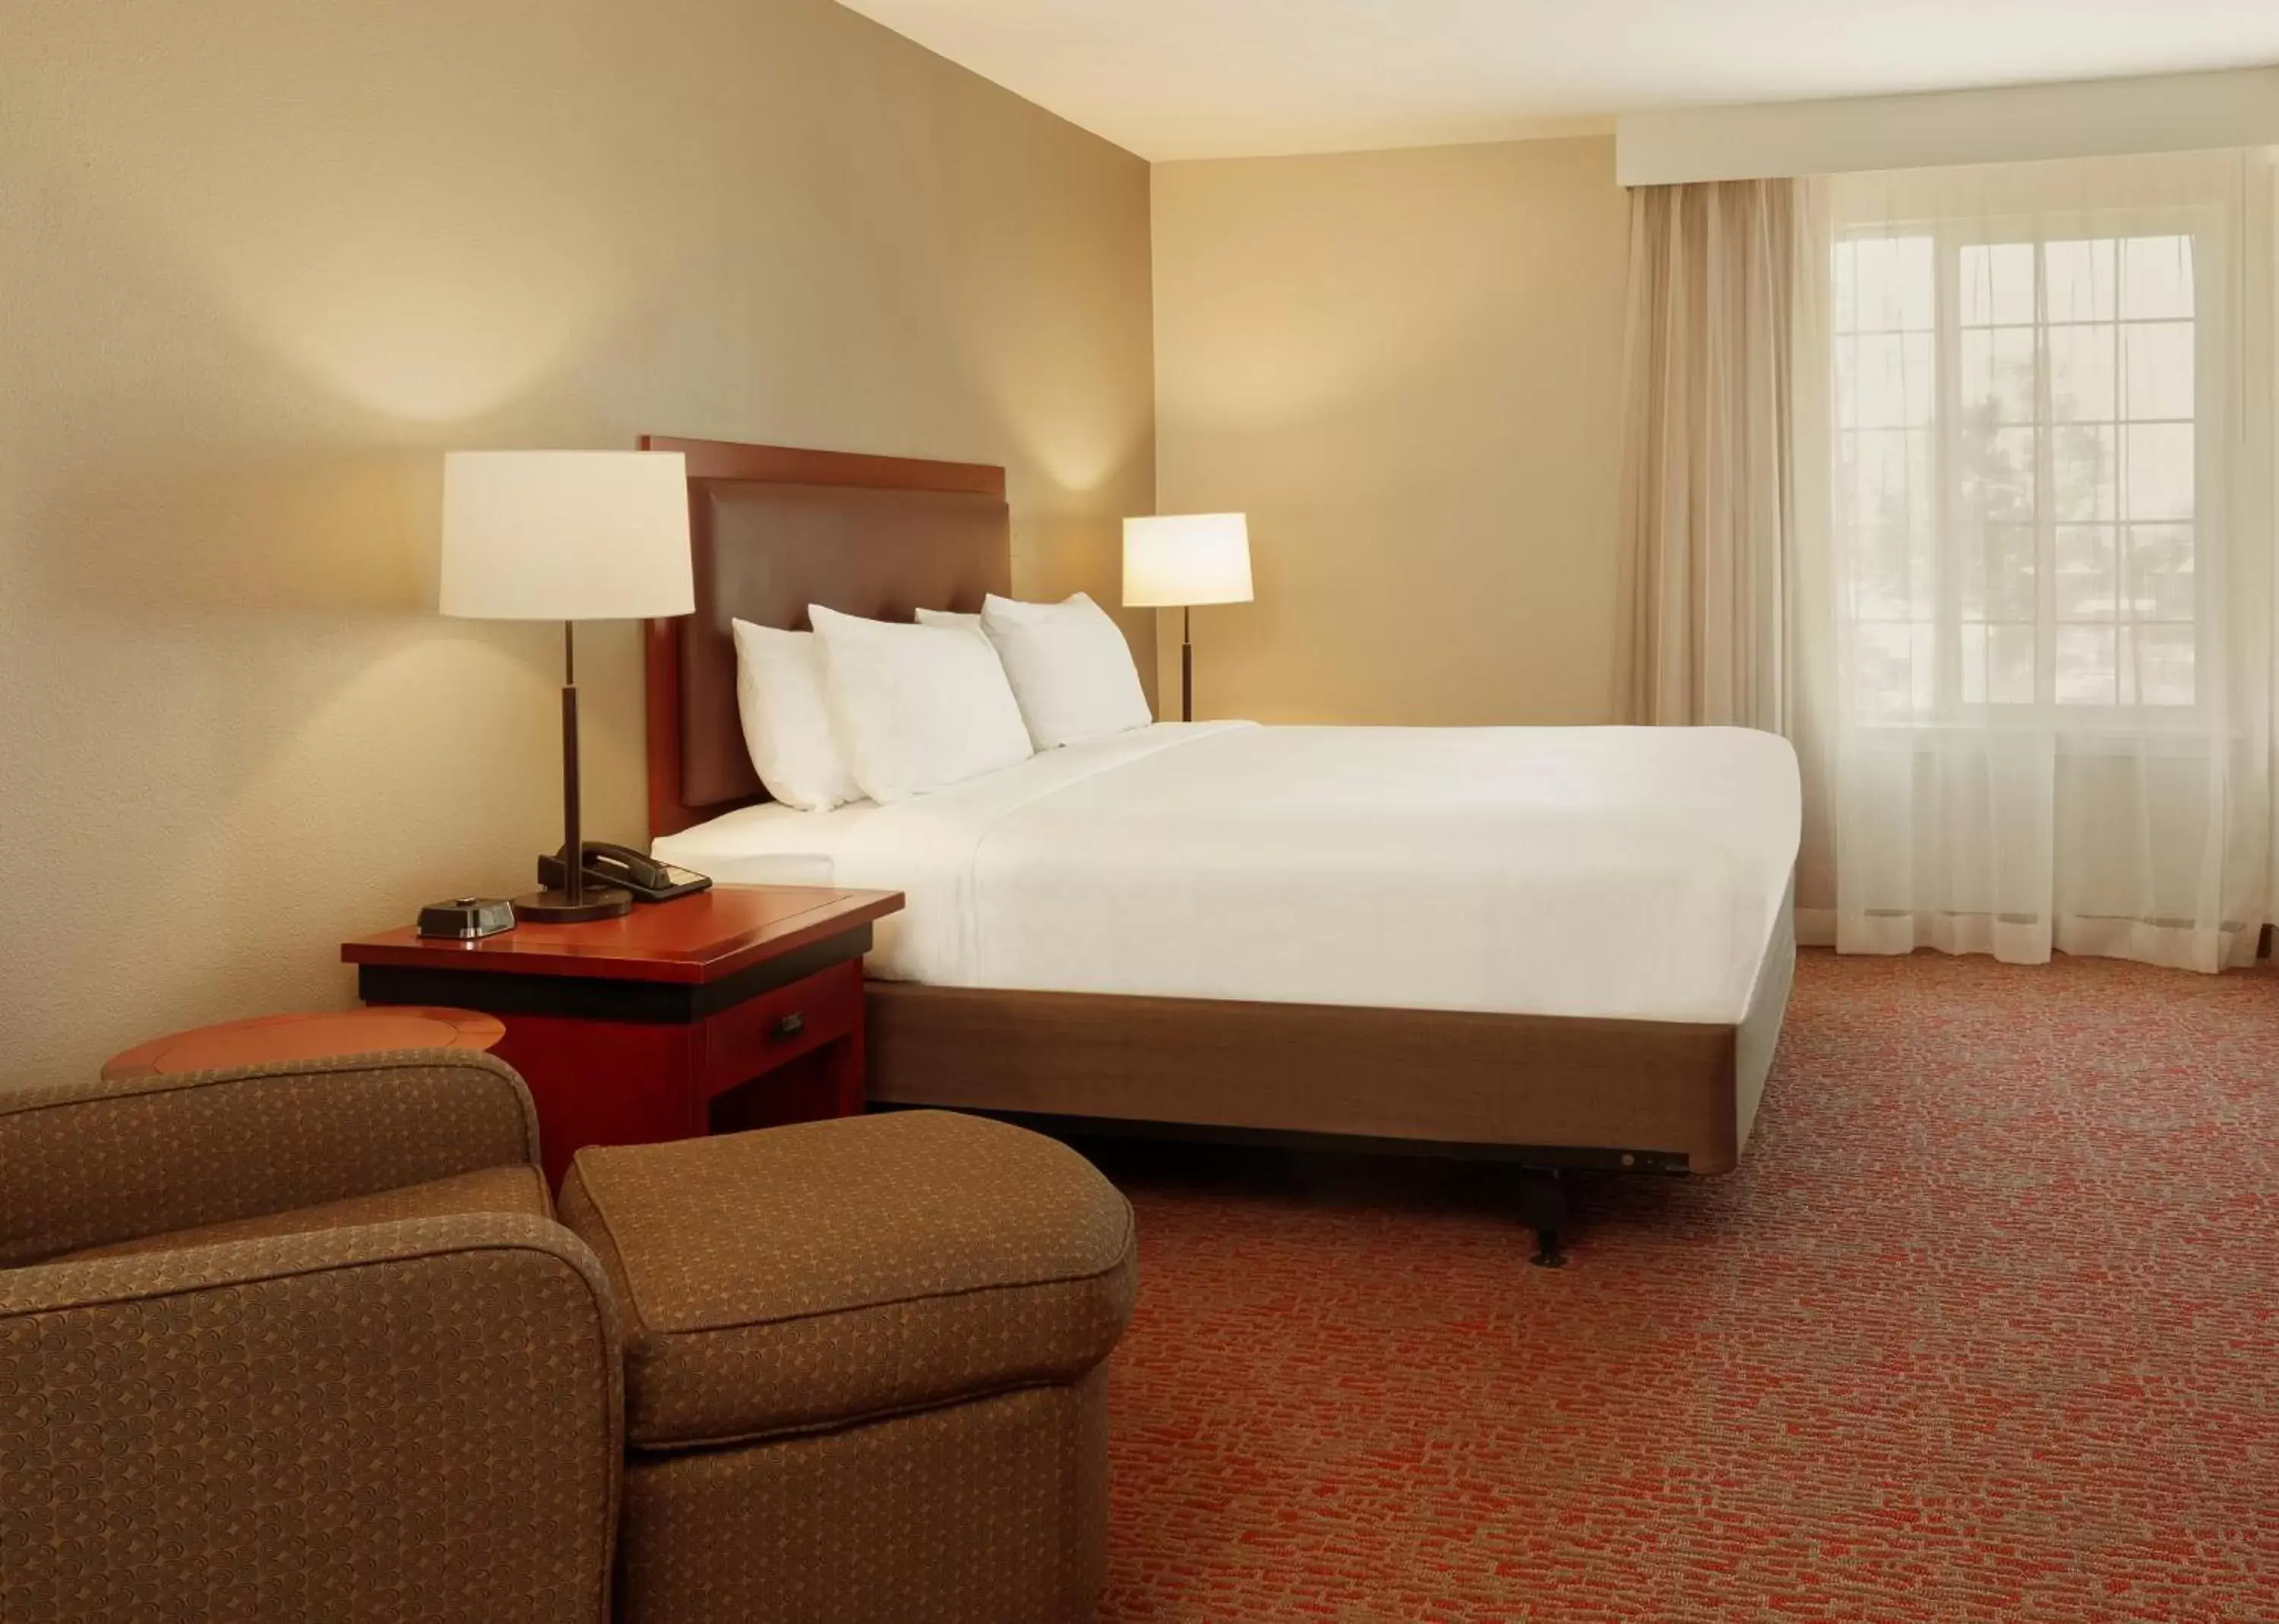 Grand Suite in Larkspur Landing Sunnyvale-An All-Suite Hotel